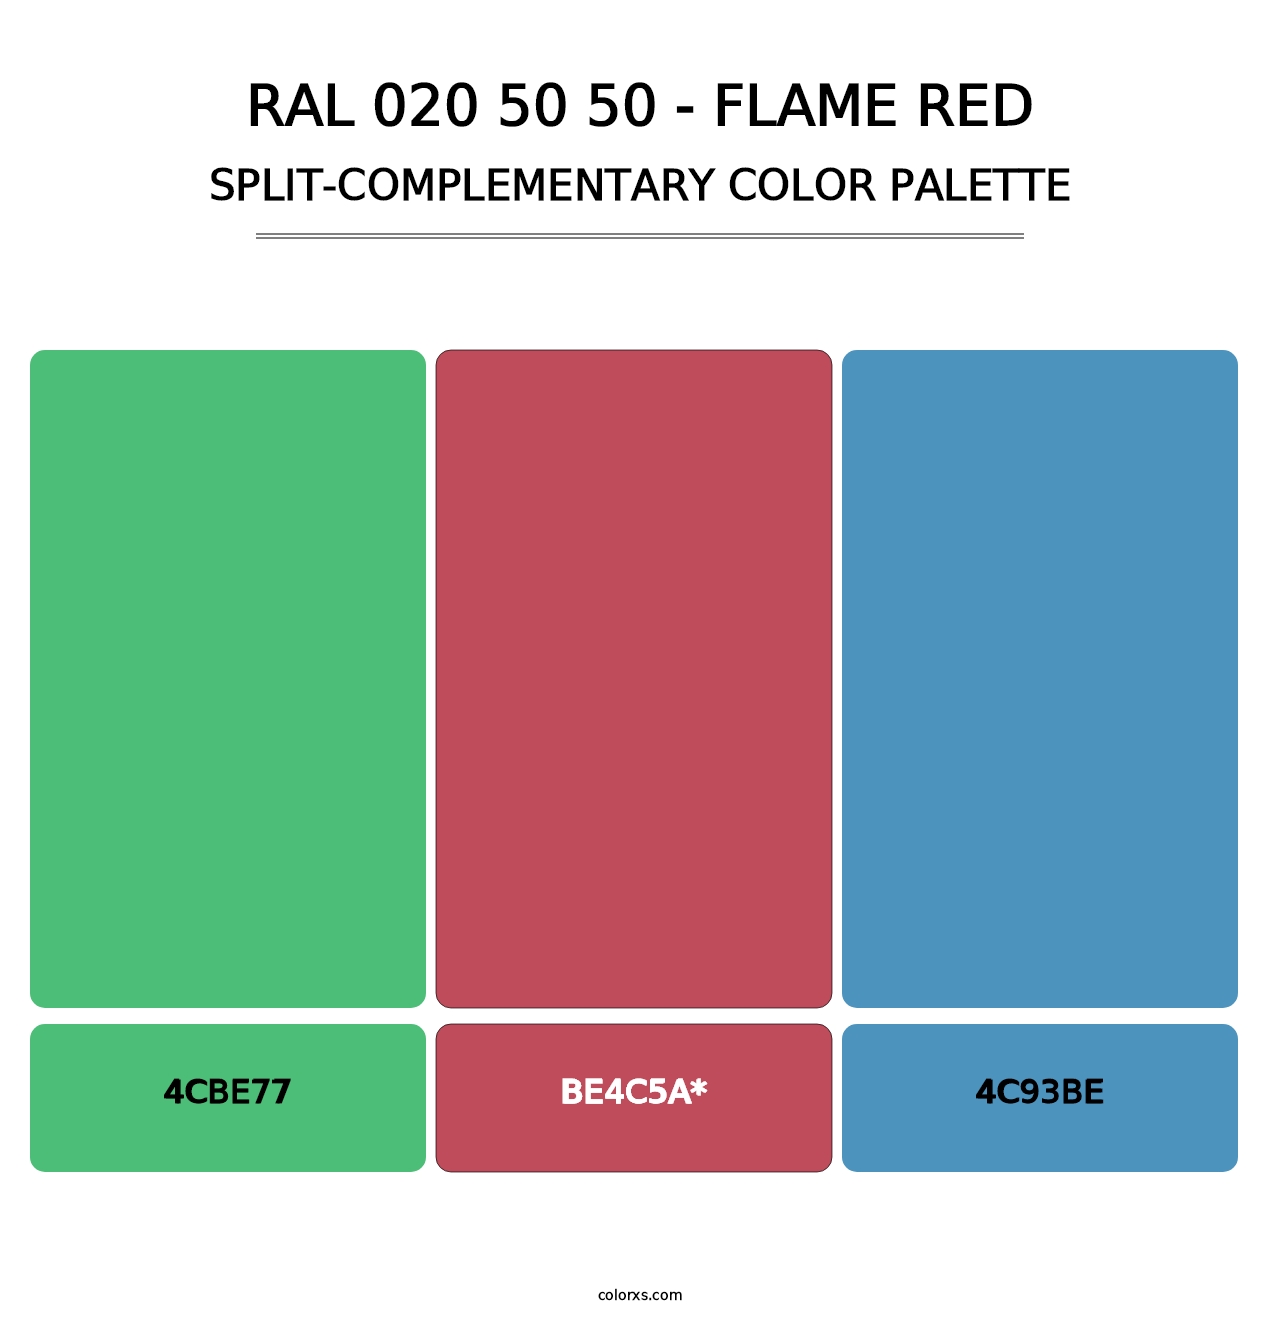 RAL 020 50 50 - Flame Red - Split-Complementary Color Palette